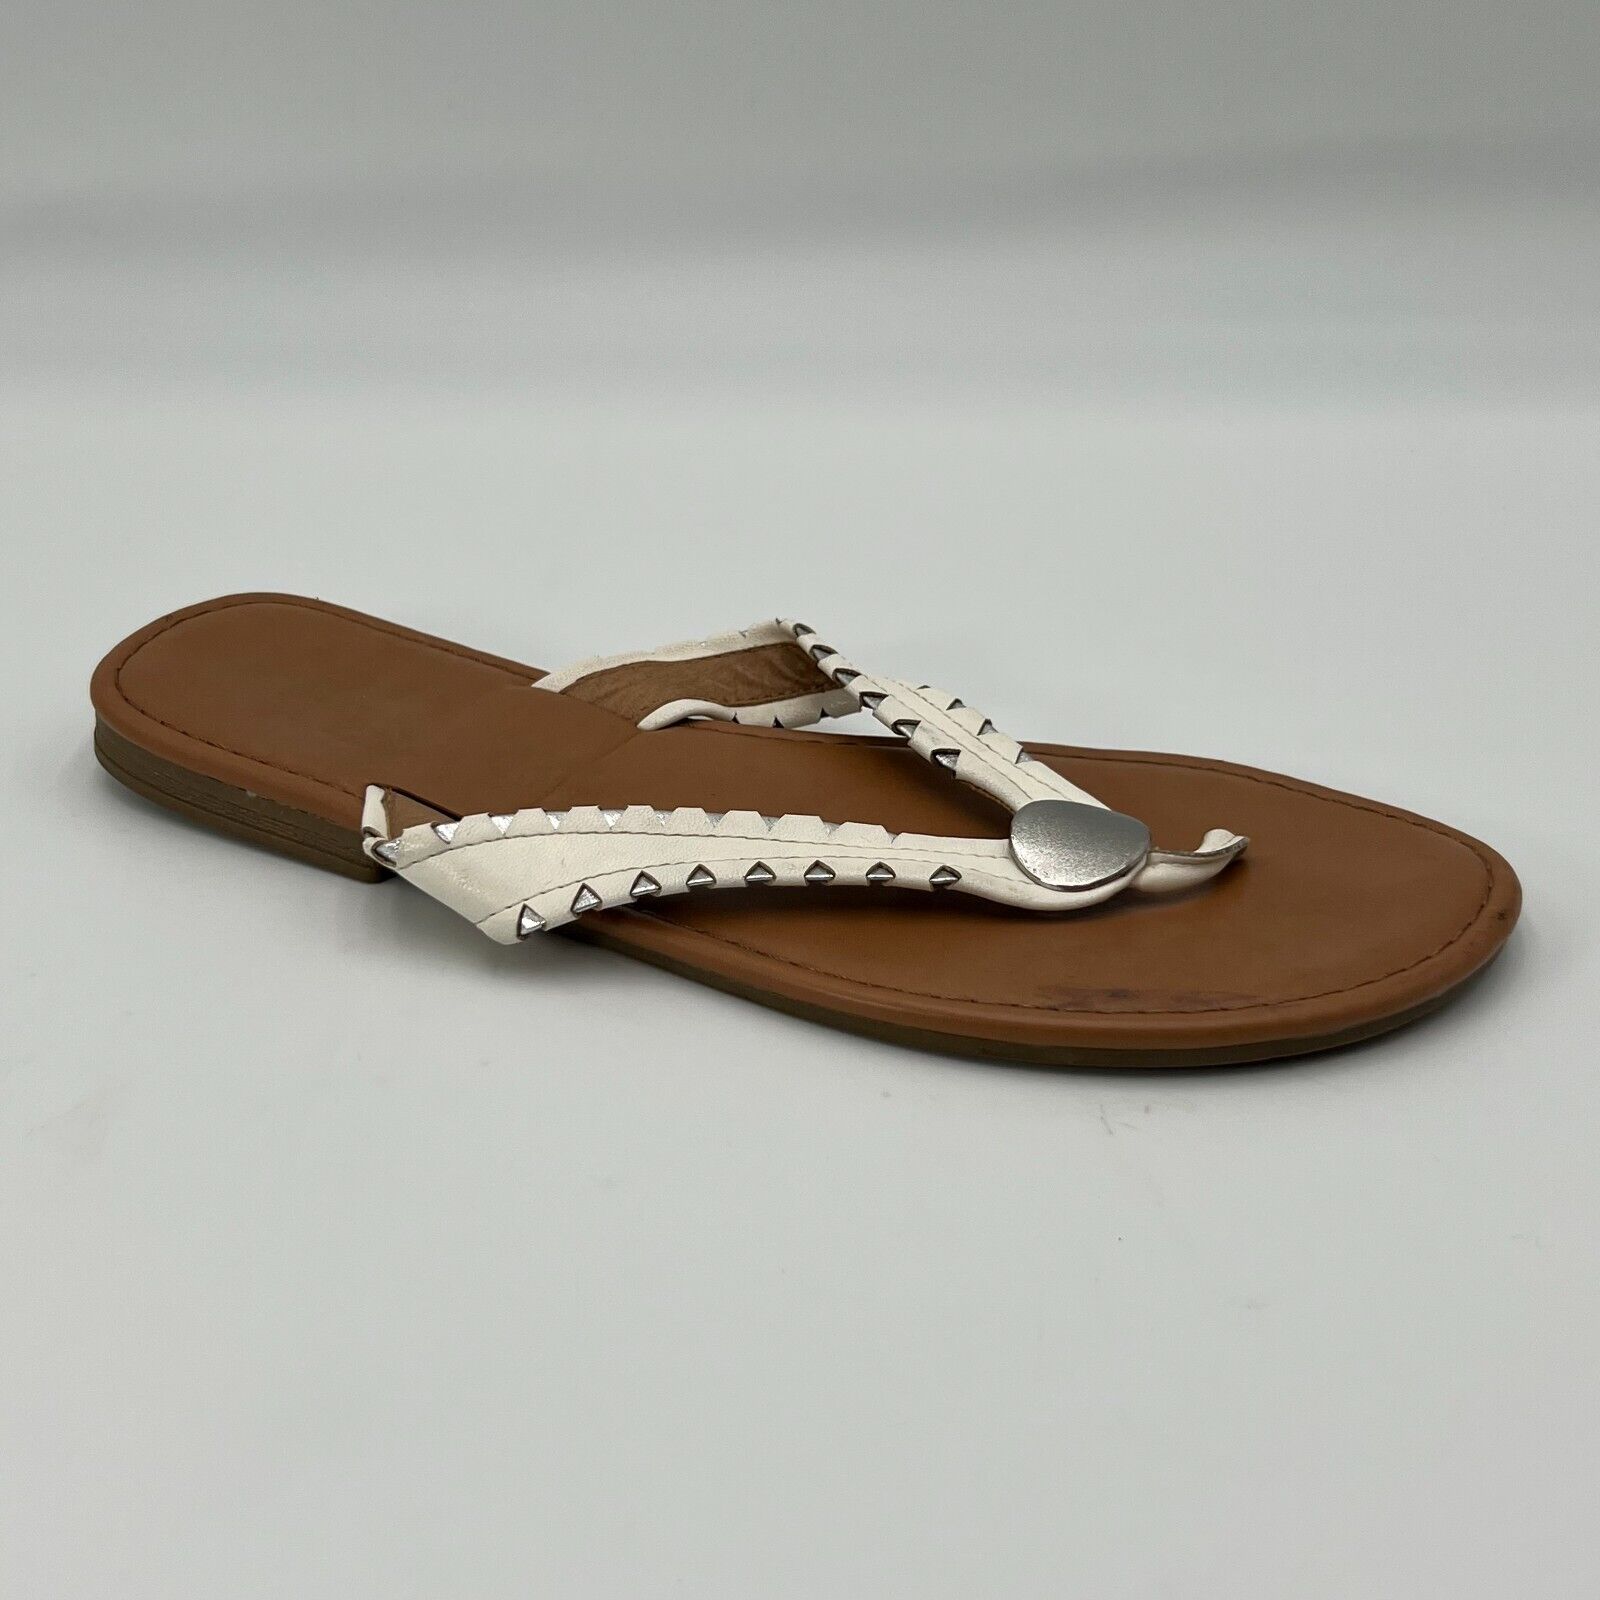 Sonoma Goods For Life Sandal Thongs White Silver Tan Flats Womens Size 8